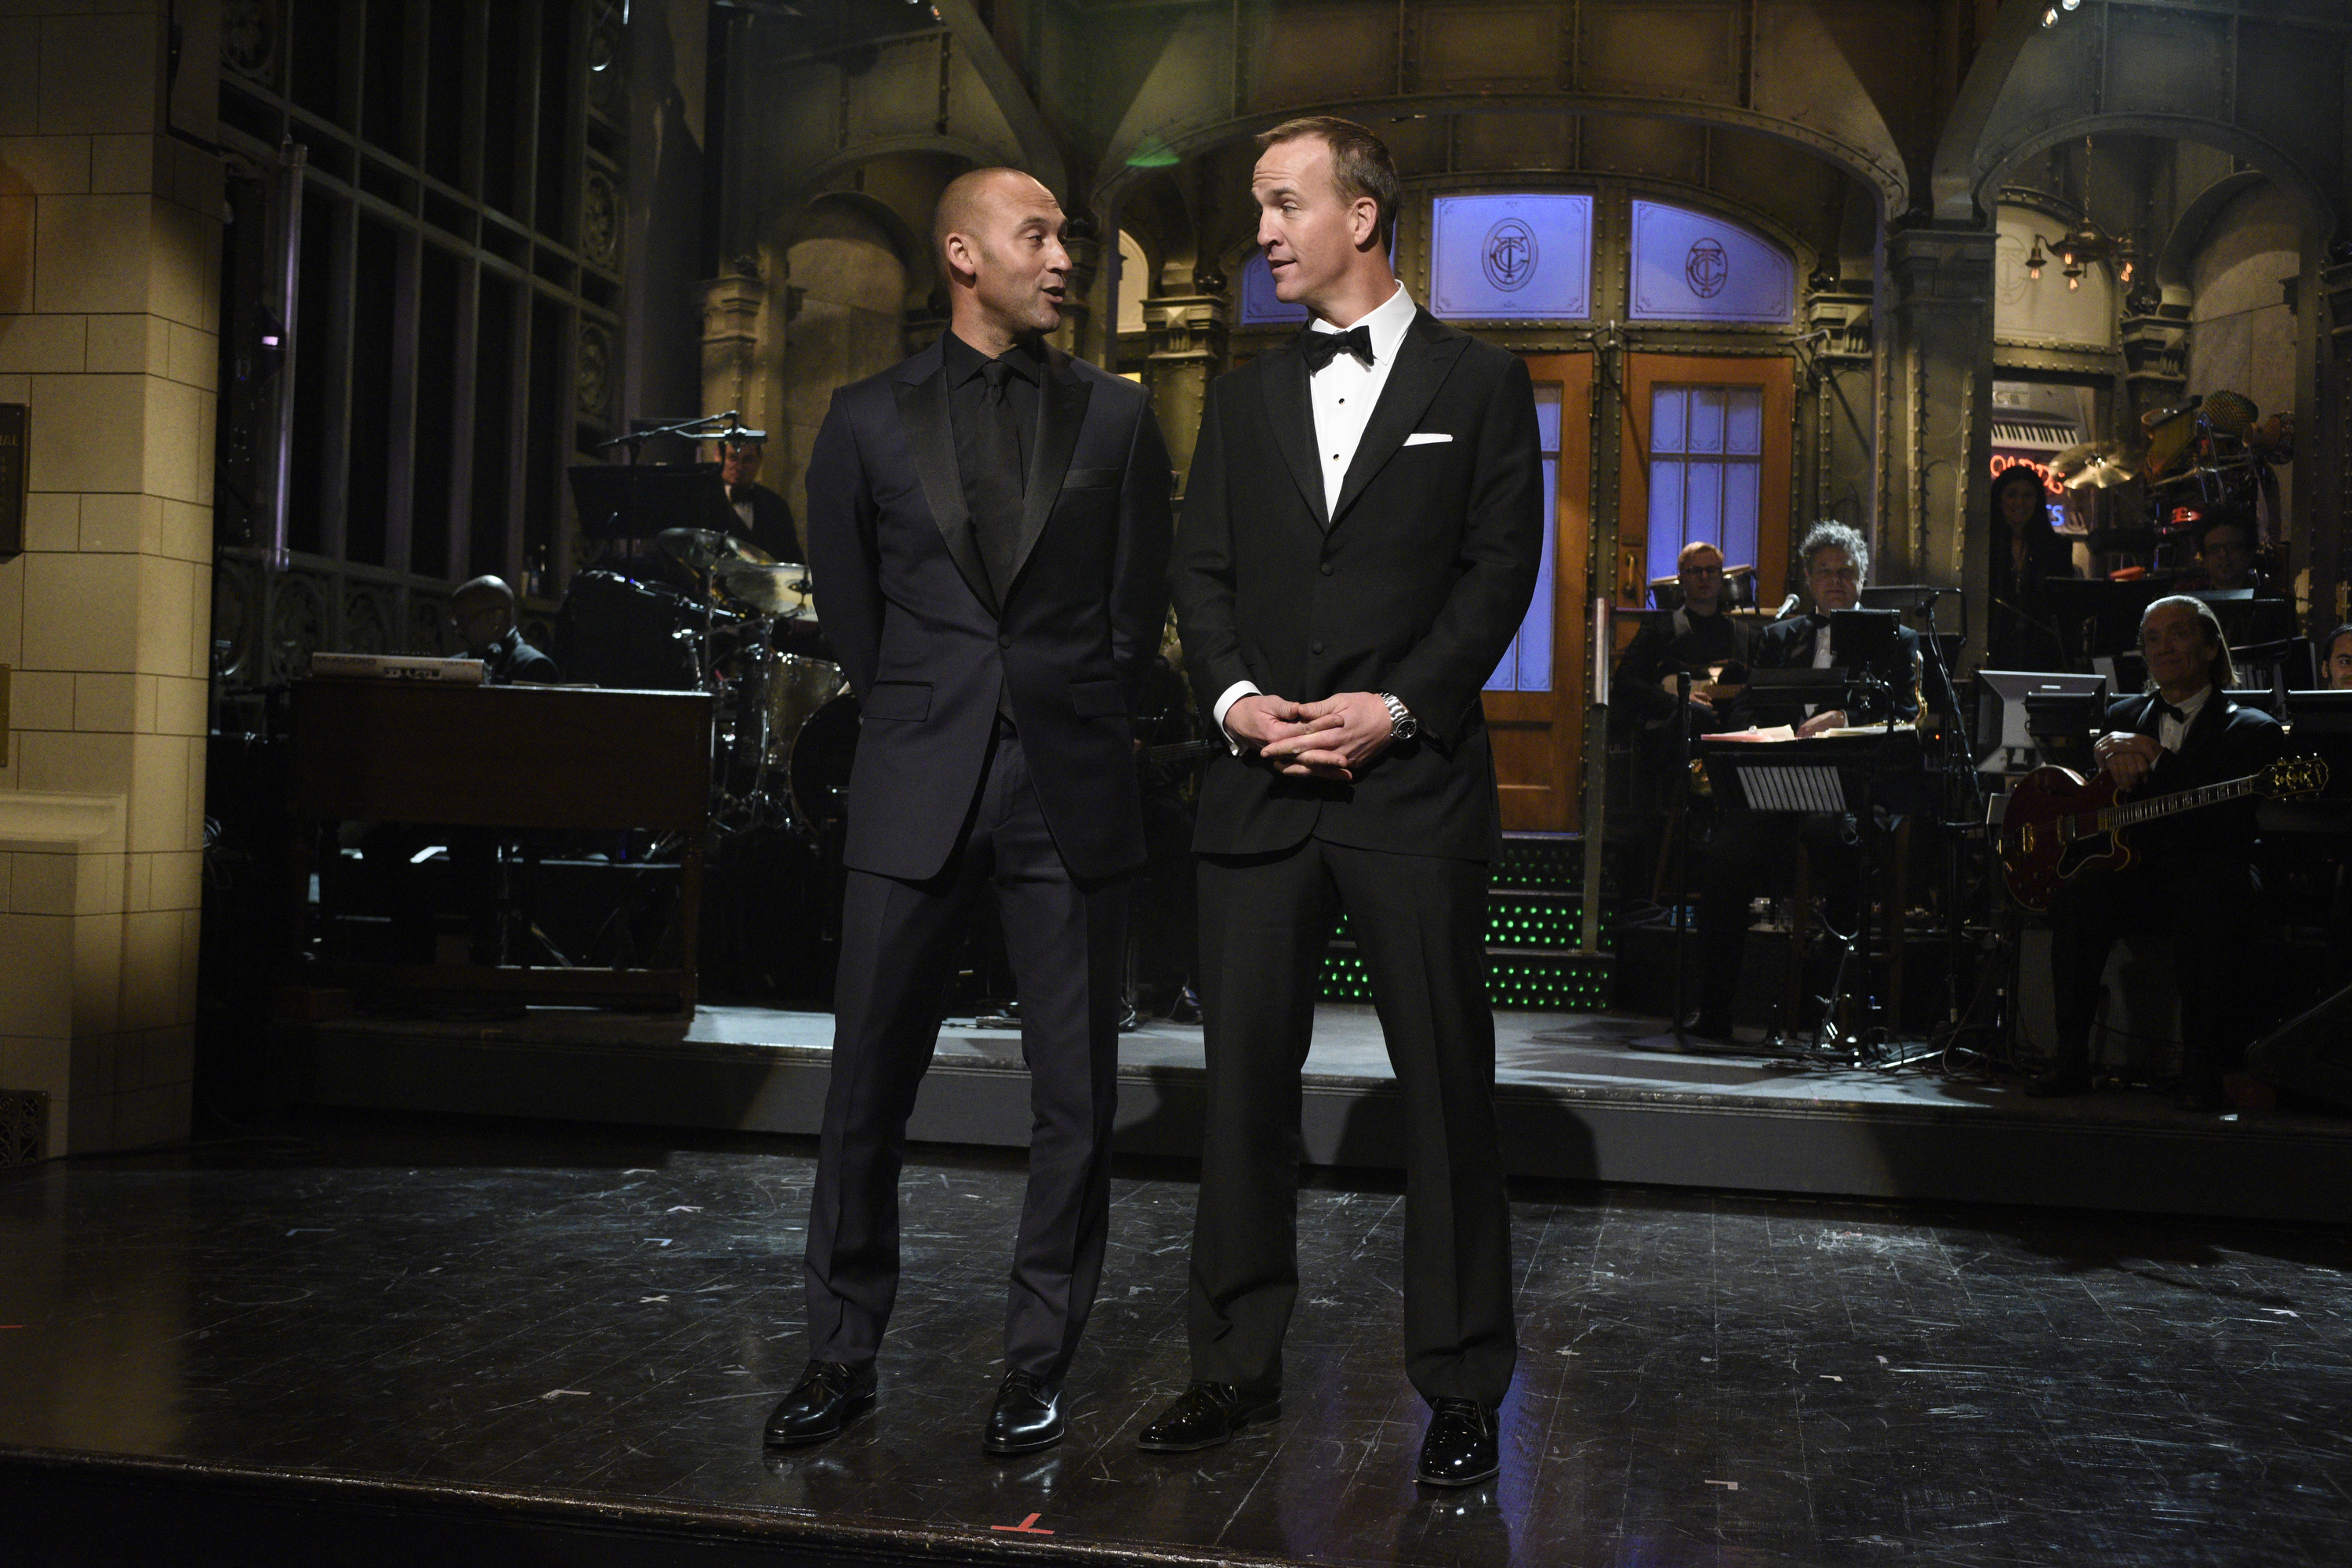 Derek Jeter and Peyton Manning helped Saturday Night Live celebrate 40 years of sports For The